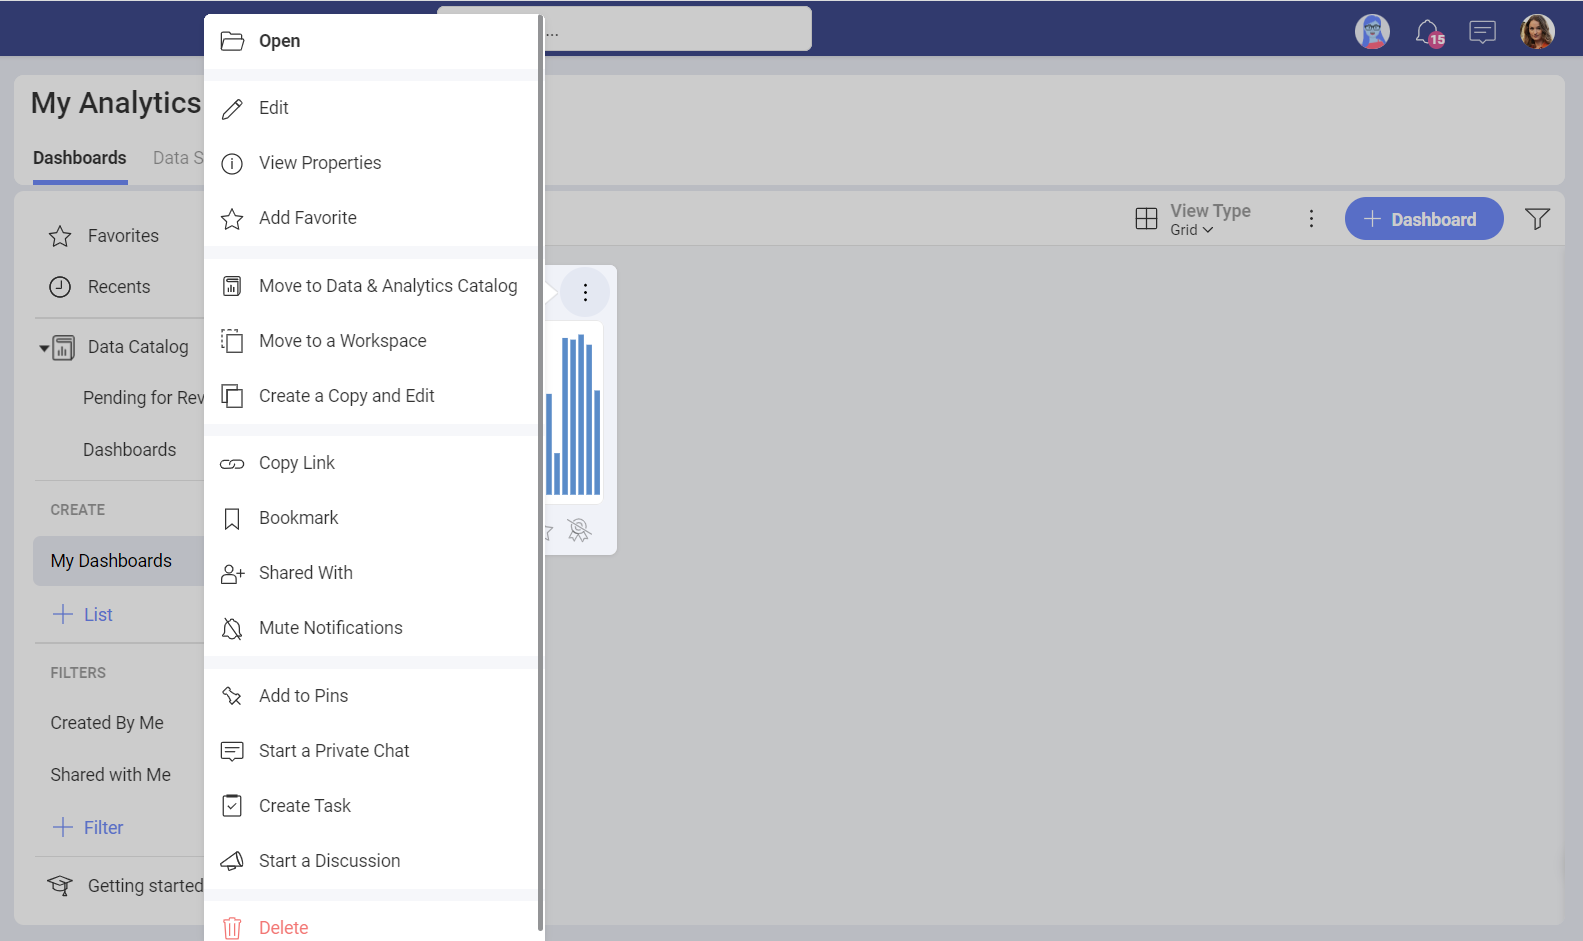 Accessing the sharing dialog of a dashboard